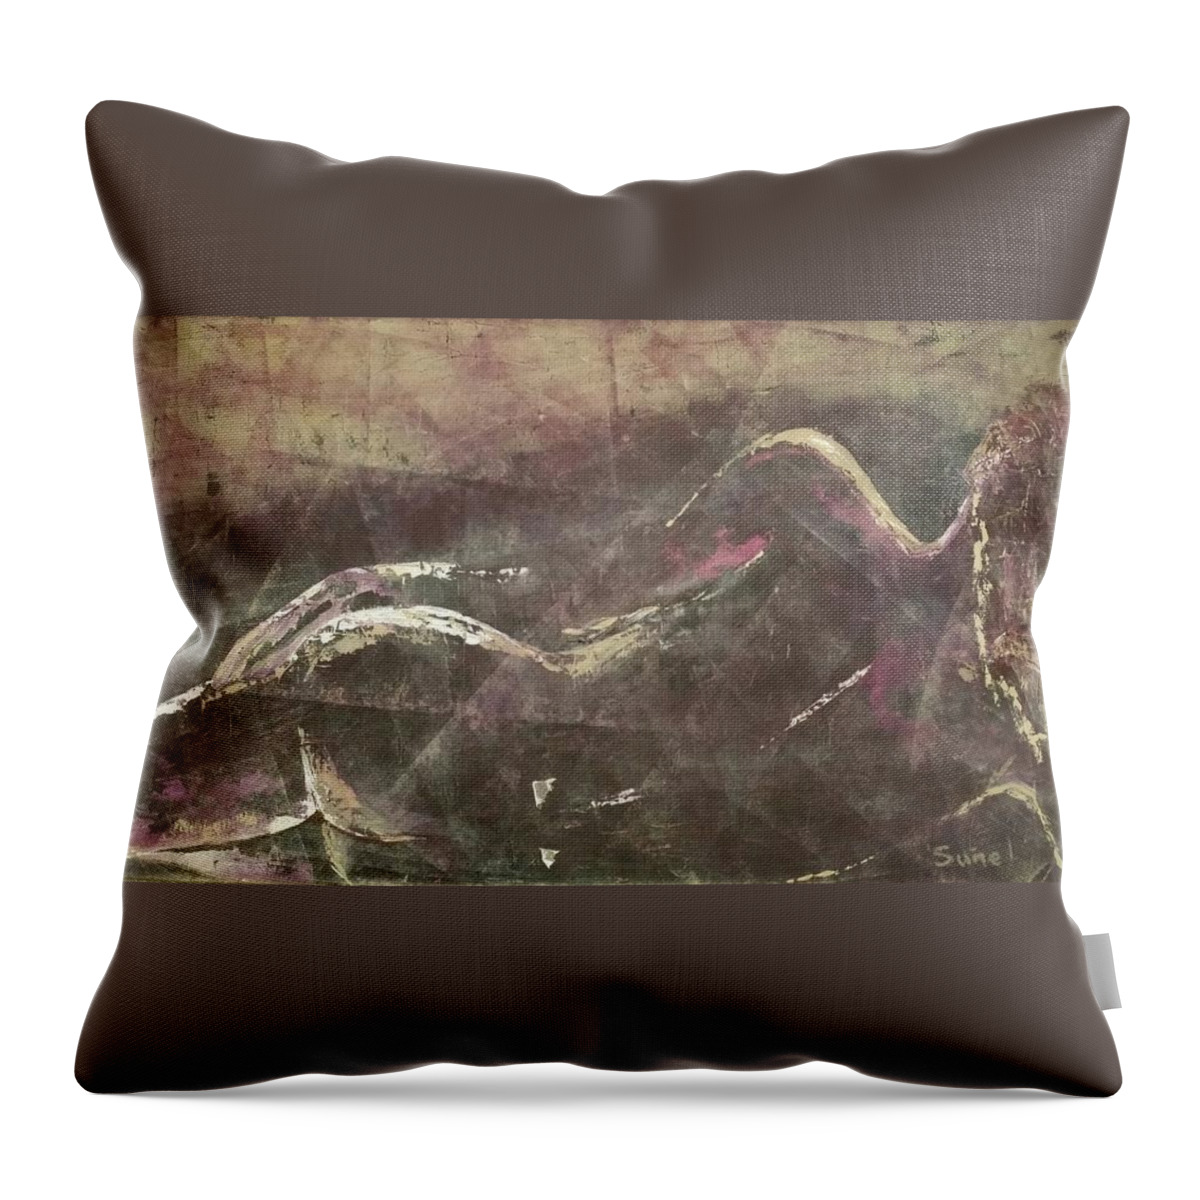 Nude Lady Throw Pillow featuring the painting Waiting by Sunel De Lange